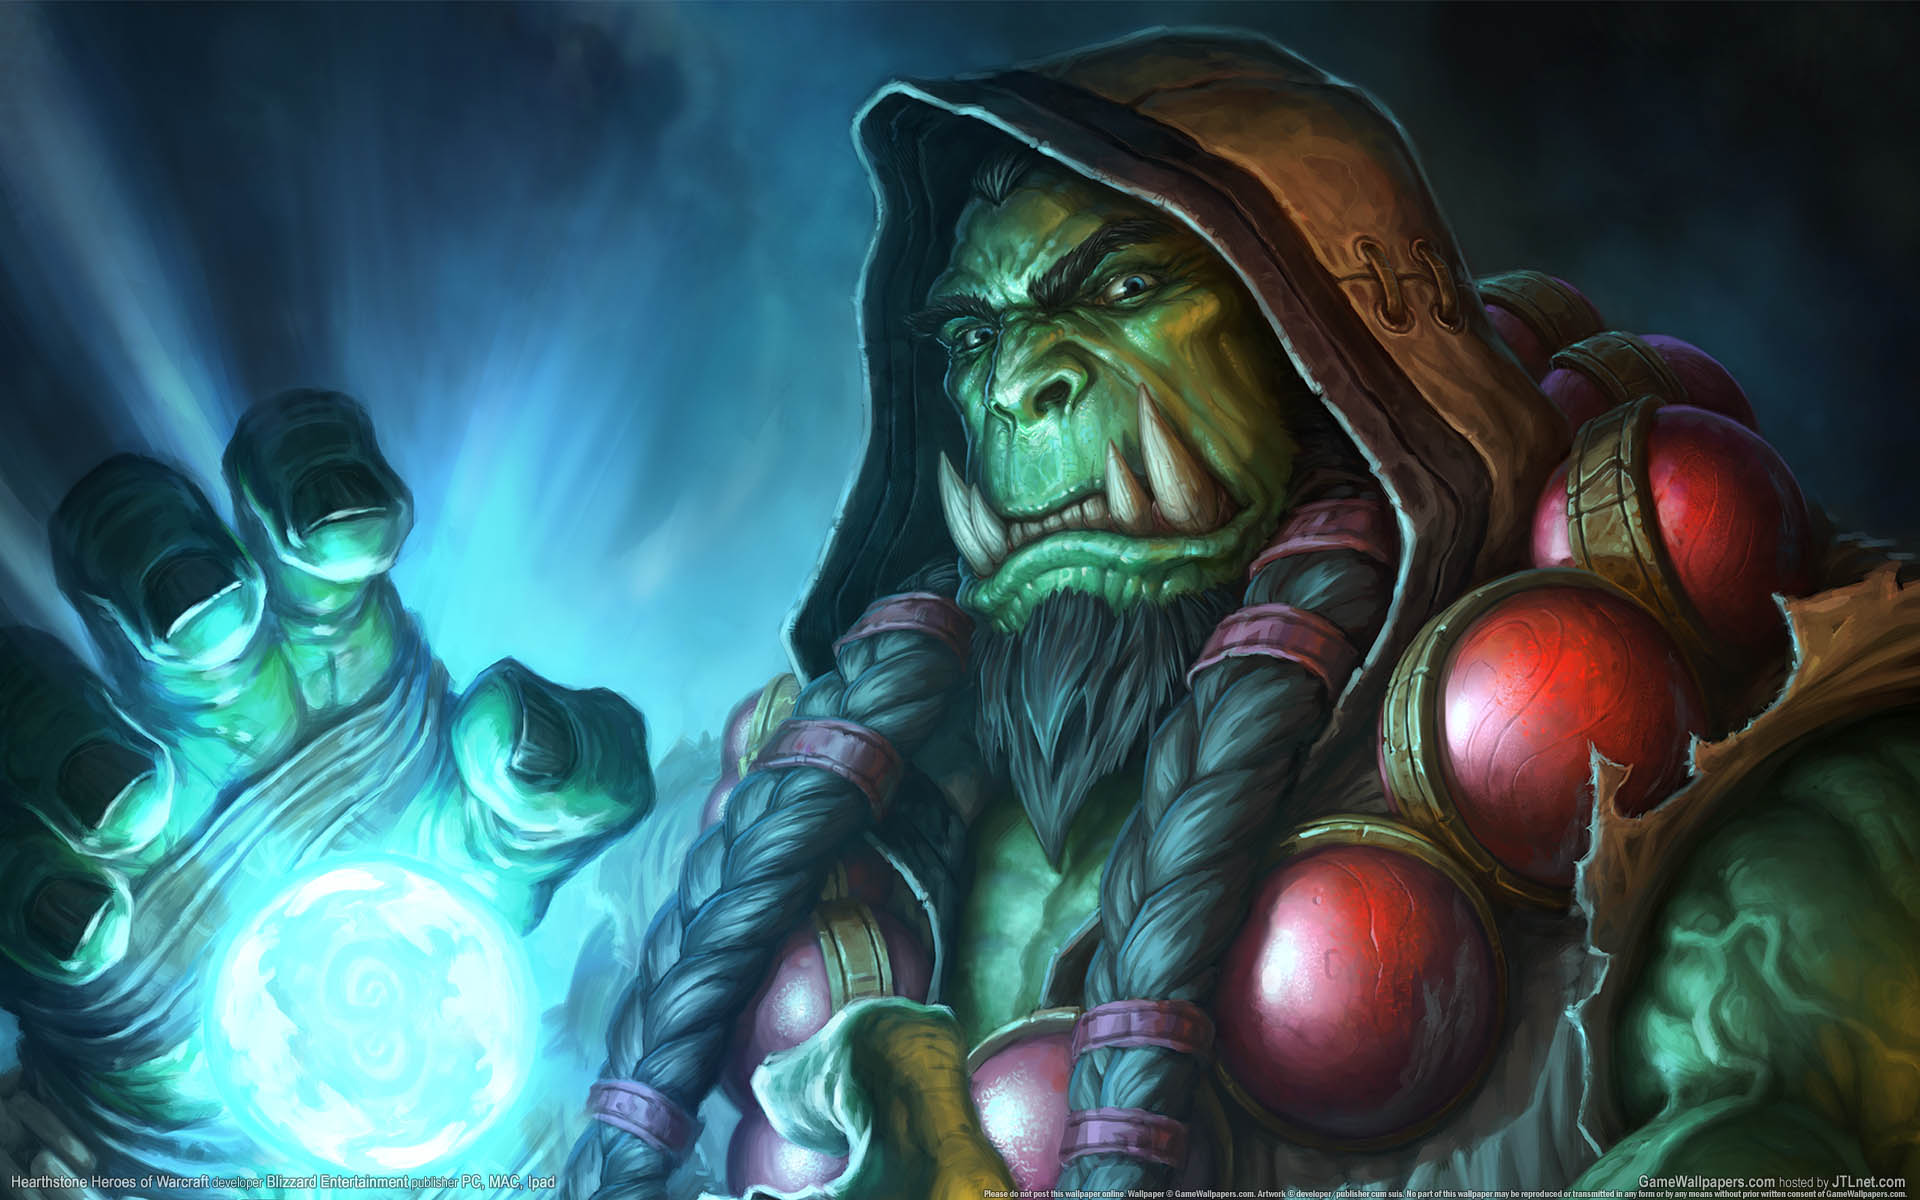 Hearthstone%3A Heroes of Warcraft achtergrond 02 1920x1200